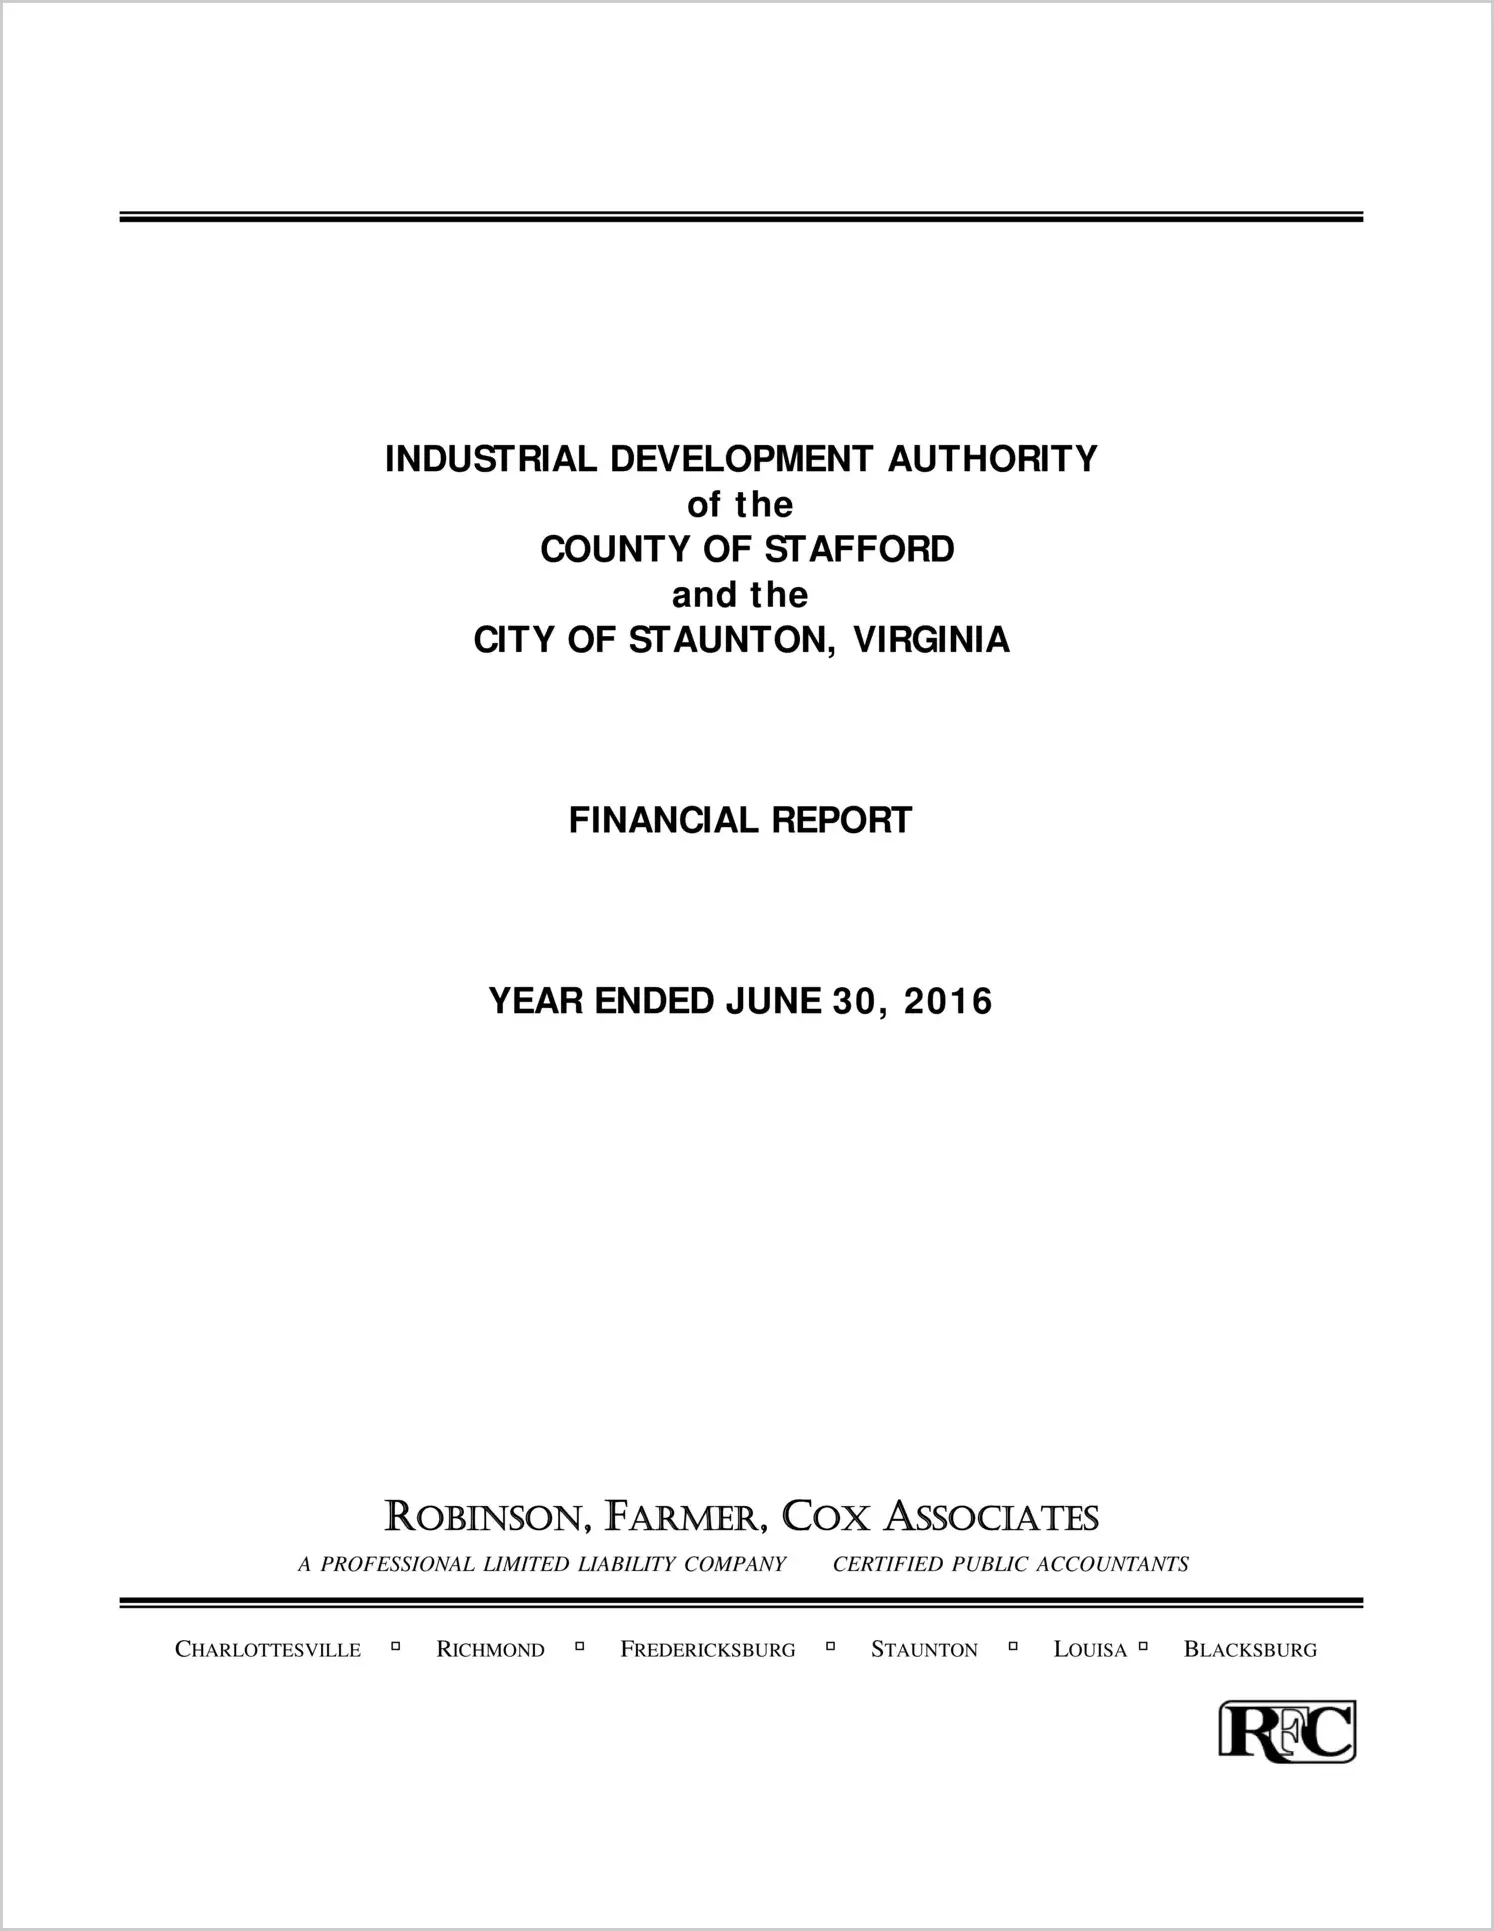 2016 ABC/Other Annual Financial Report  for Stafford-Staunton Industrial Development Authority